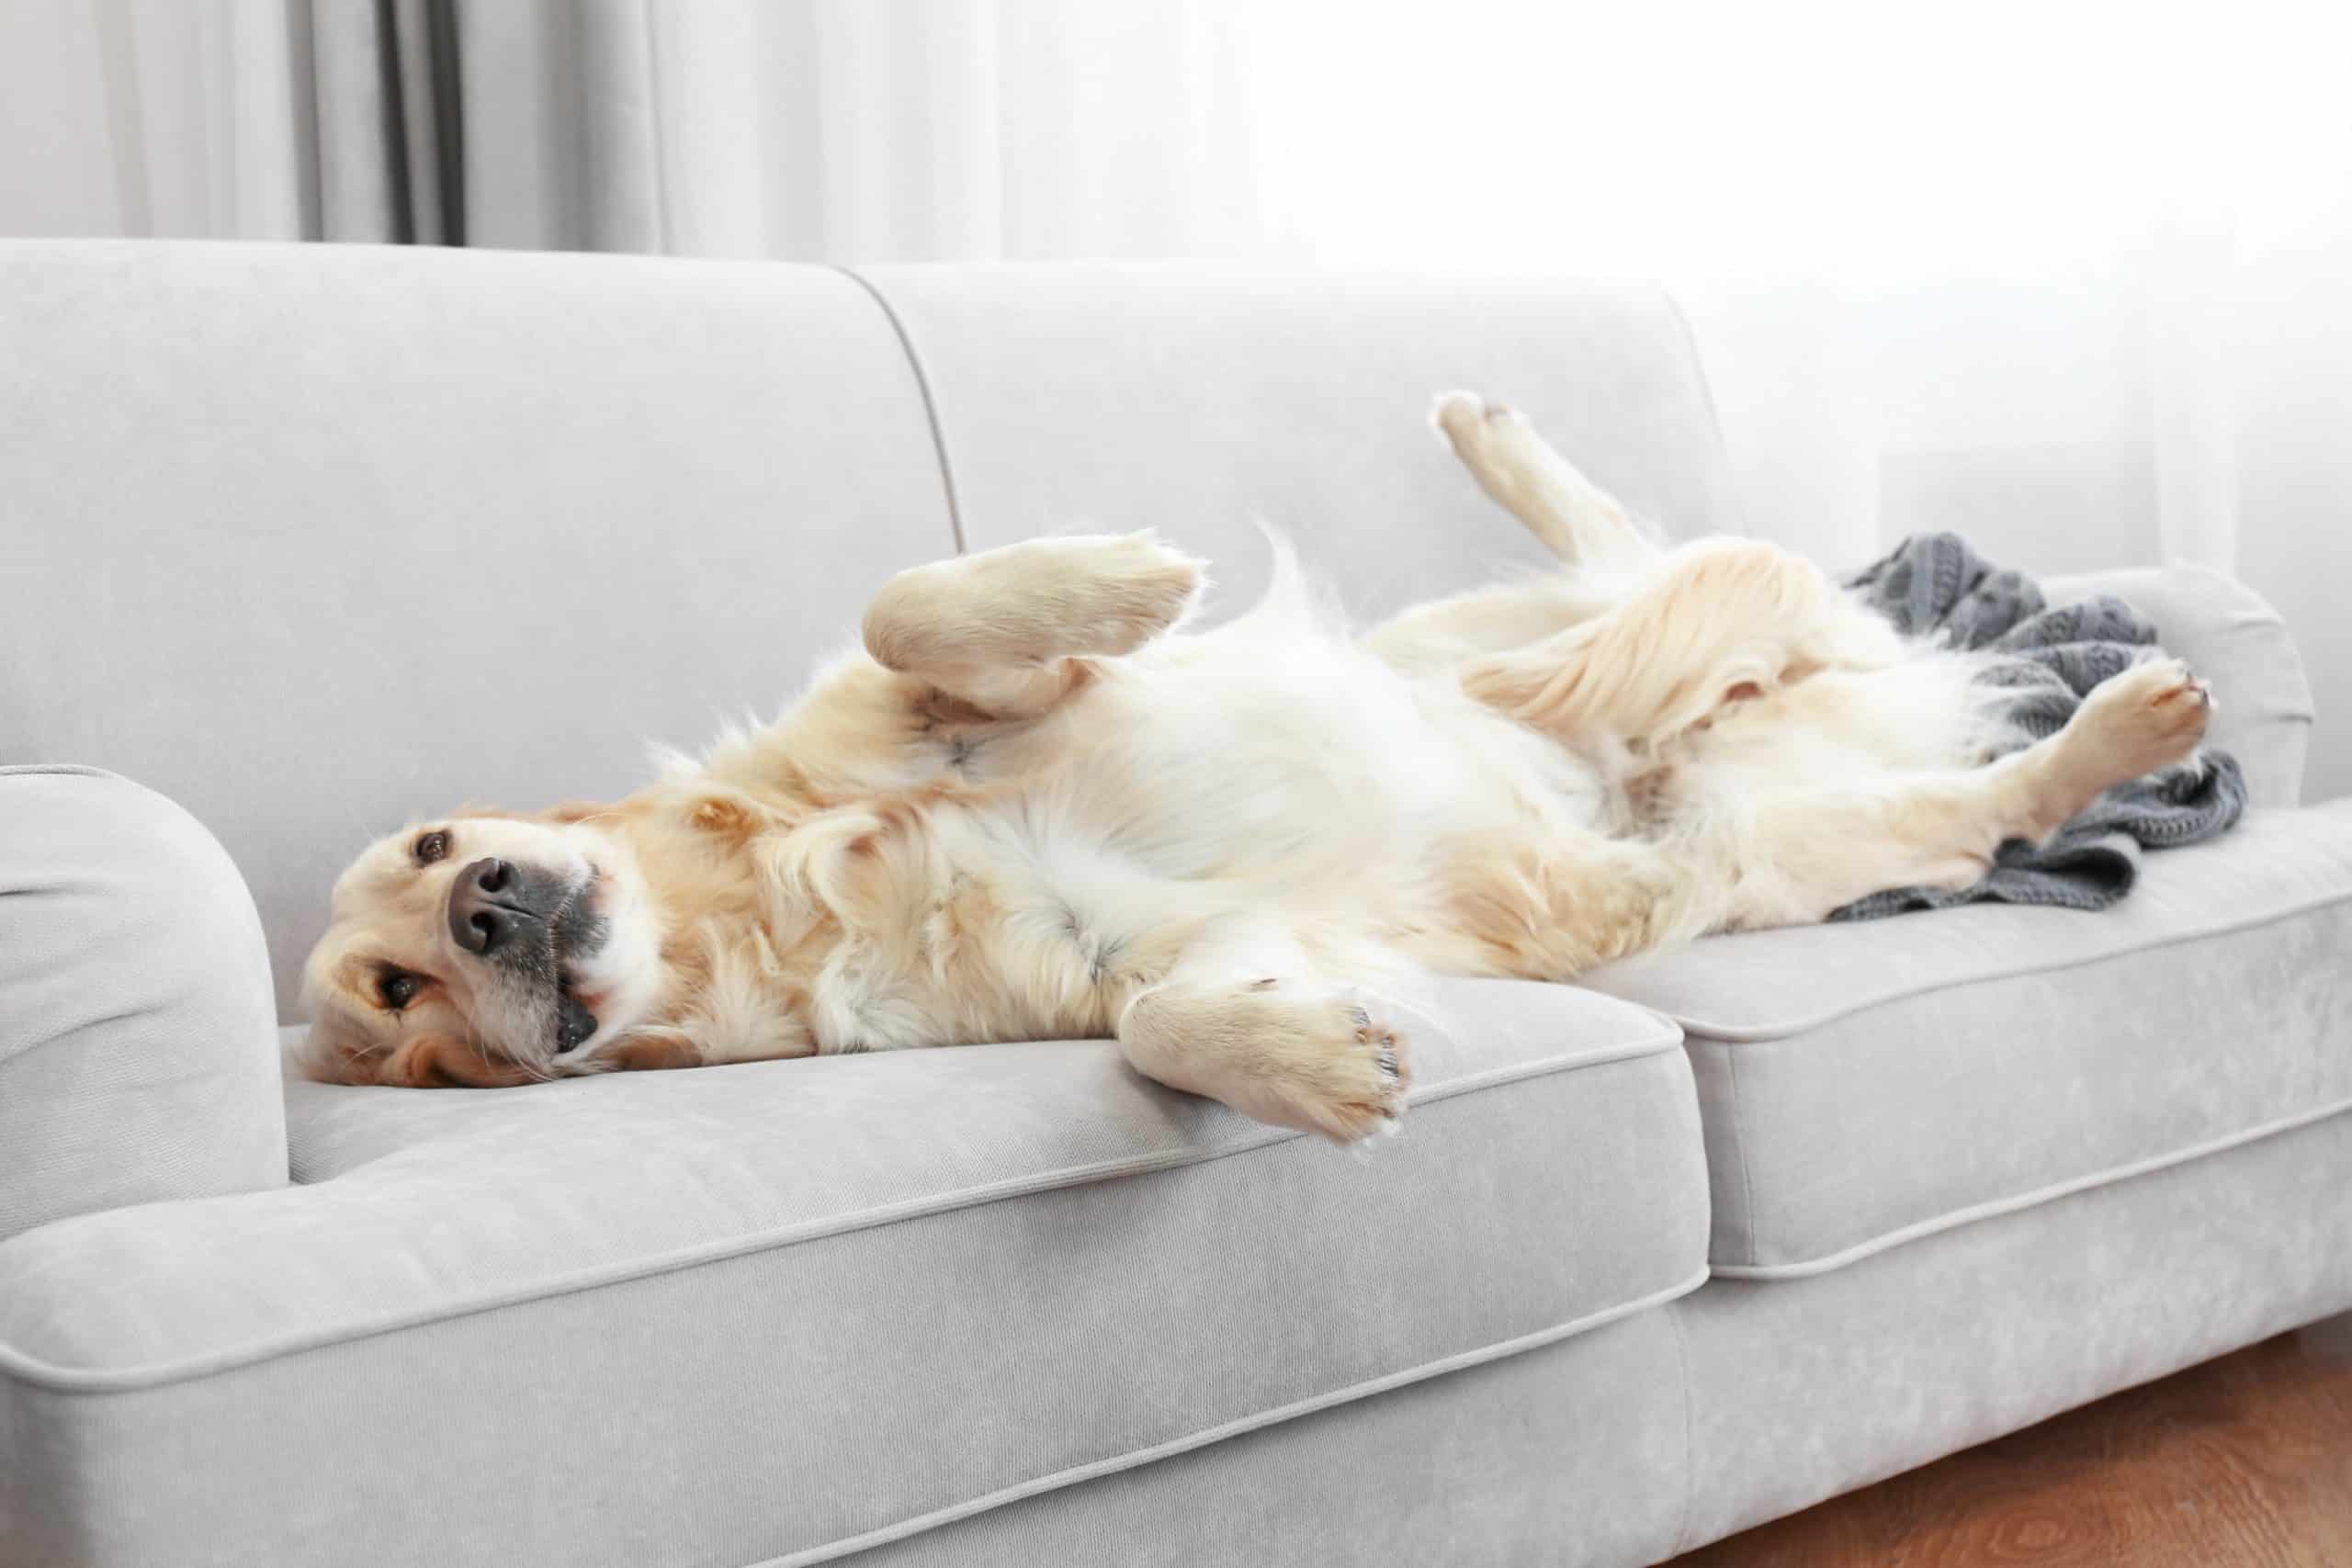 Happy Golden Retriever lounges on gray couch. Choose a flea treatment for dogs that's easy to use, works immediately, kills fleas at all life stages, and uses safe ingredients.